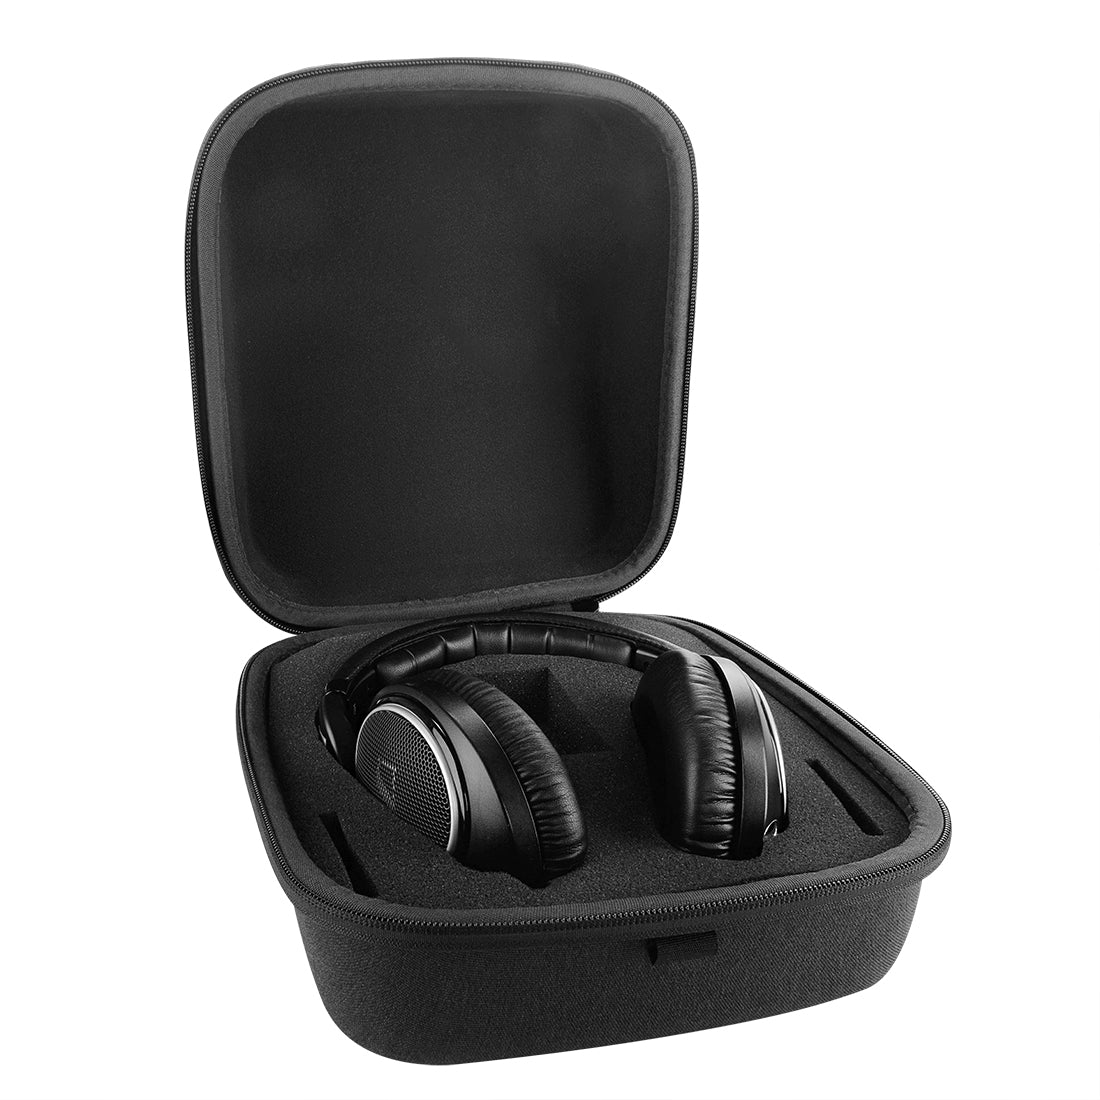  Geekria Shield Headphones Case Compatible with Sennheiser  HD400PRO, HD 560S, HD598, HD 599SE, HD280PRO, HD 600 Case, Replacement Hard  Shell Travel Carrying Bag with Cable Storage (Dark Grey) : Electronics